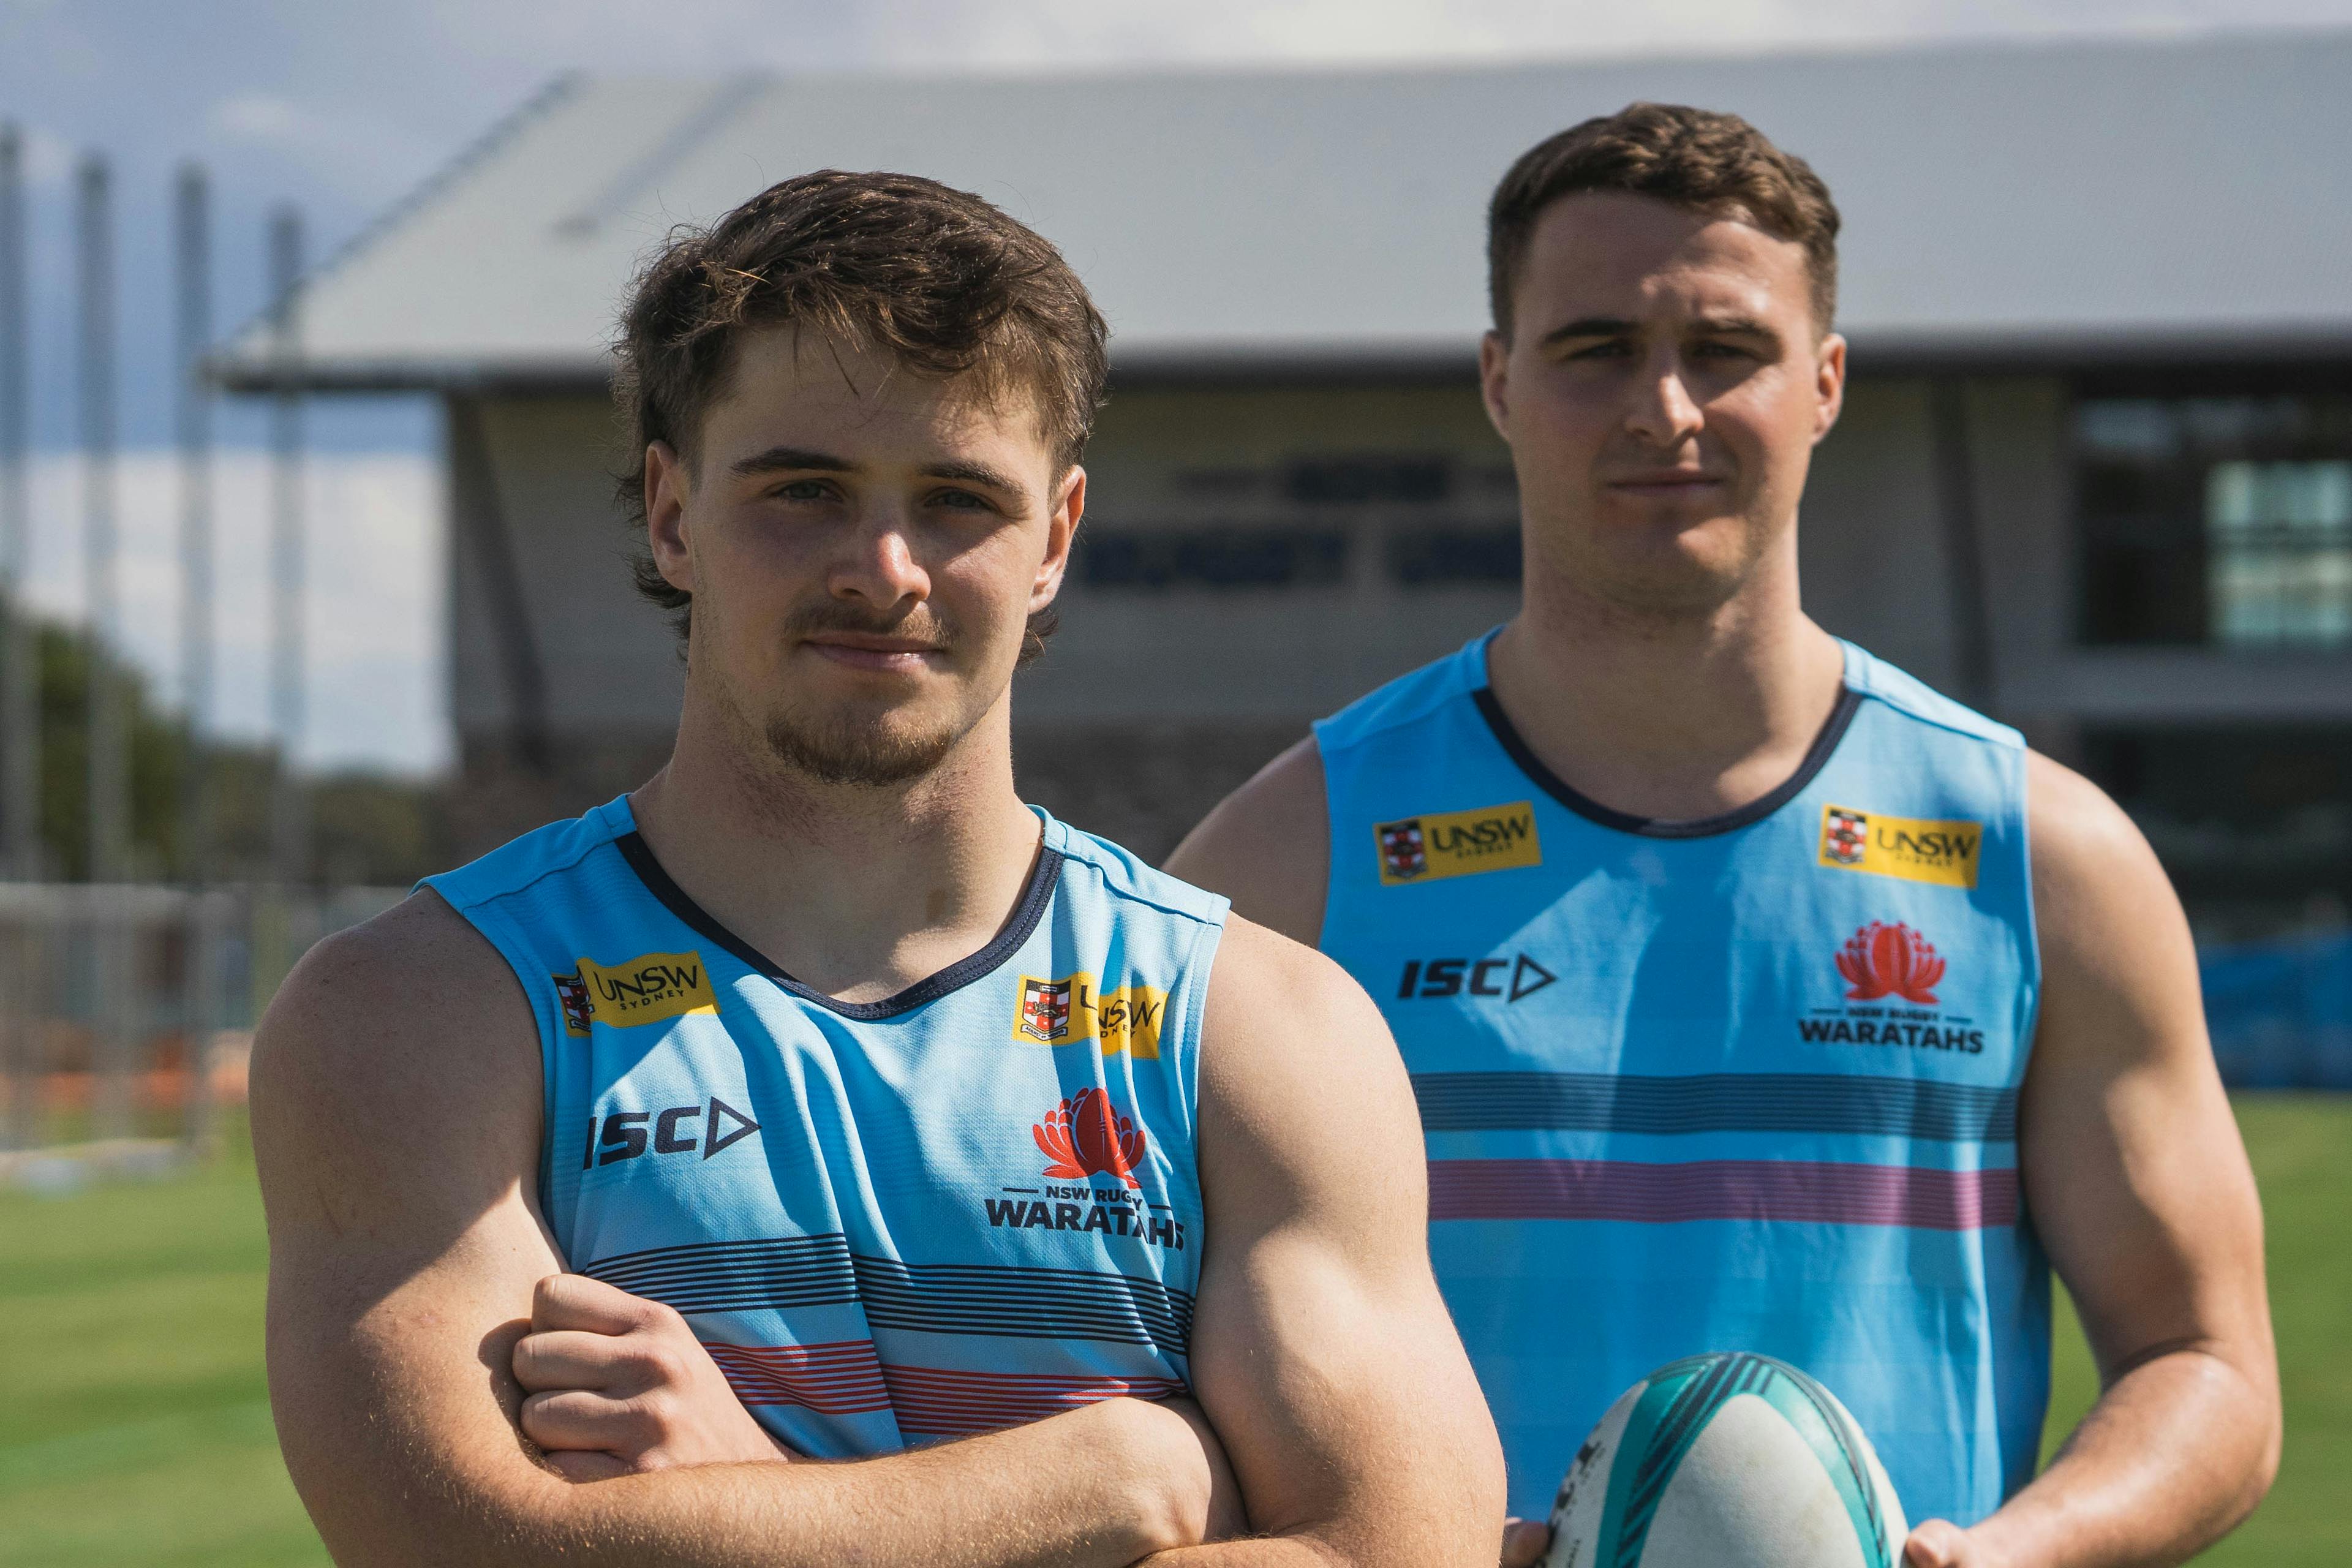 The Waratahs have locked in NSW pathway graduates Teddy and Harry Wilson